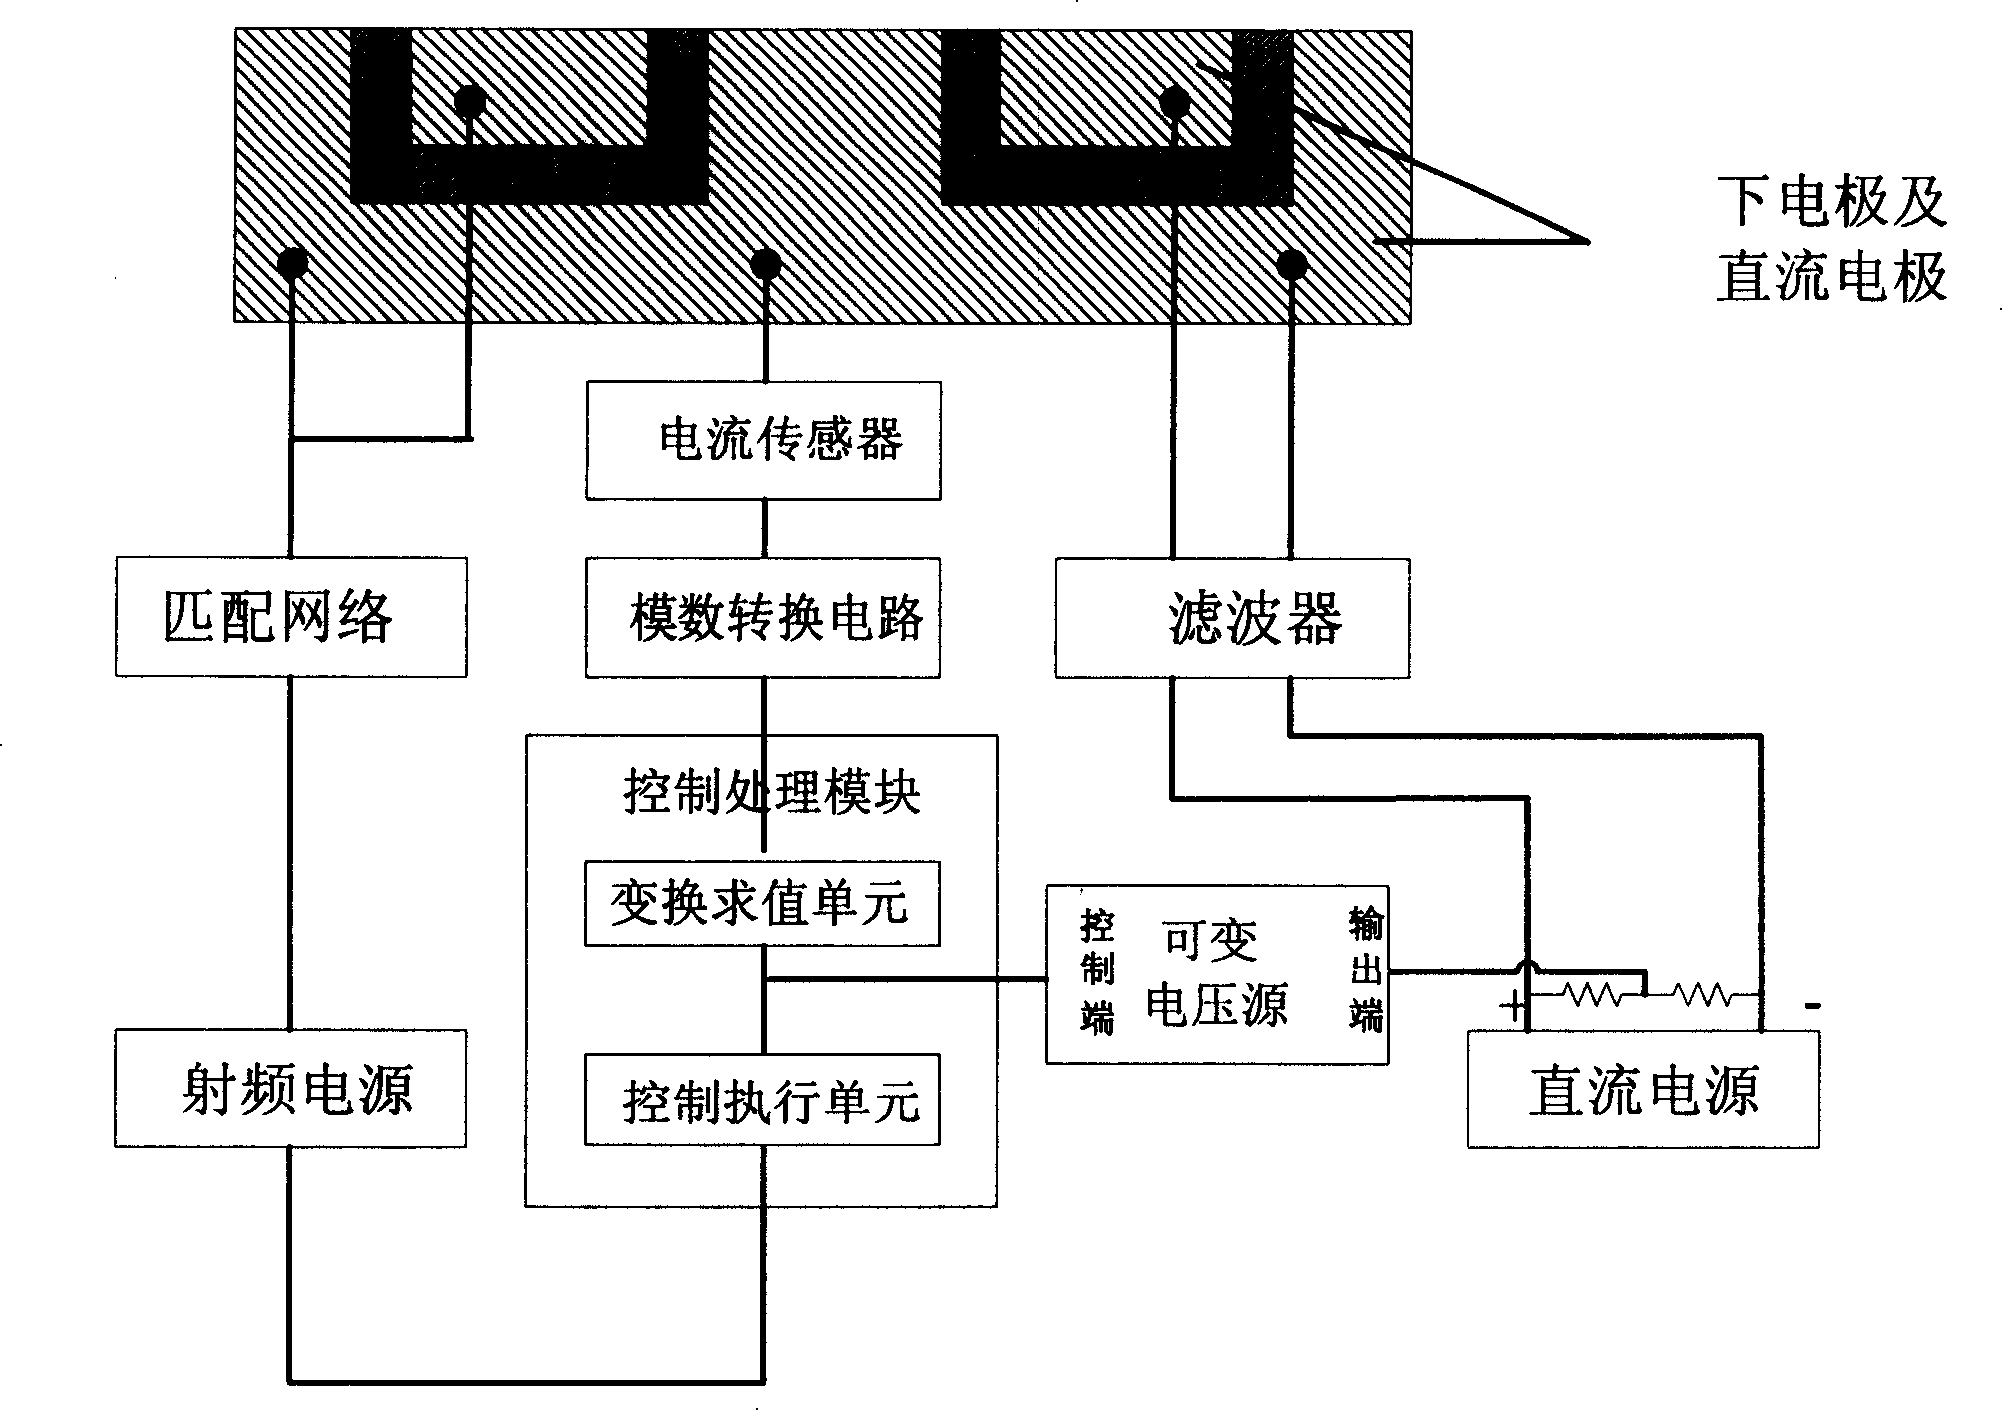 Method and device for controlling wafer DC auto-bias and compensating electrostatic gravitational force between direct current electrode and water